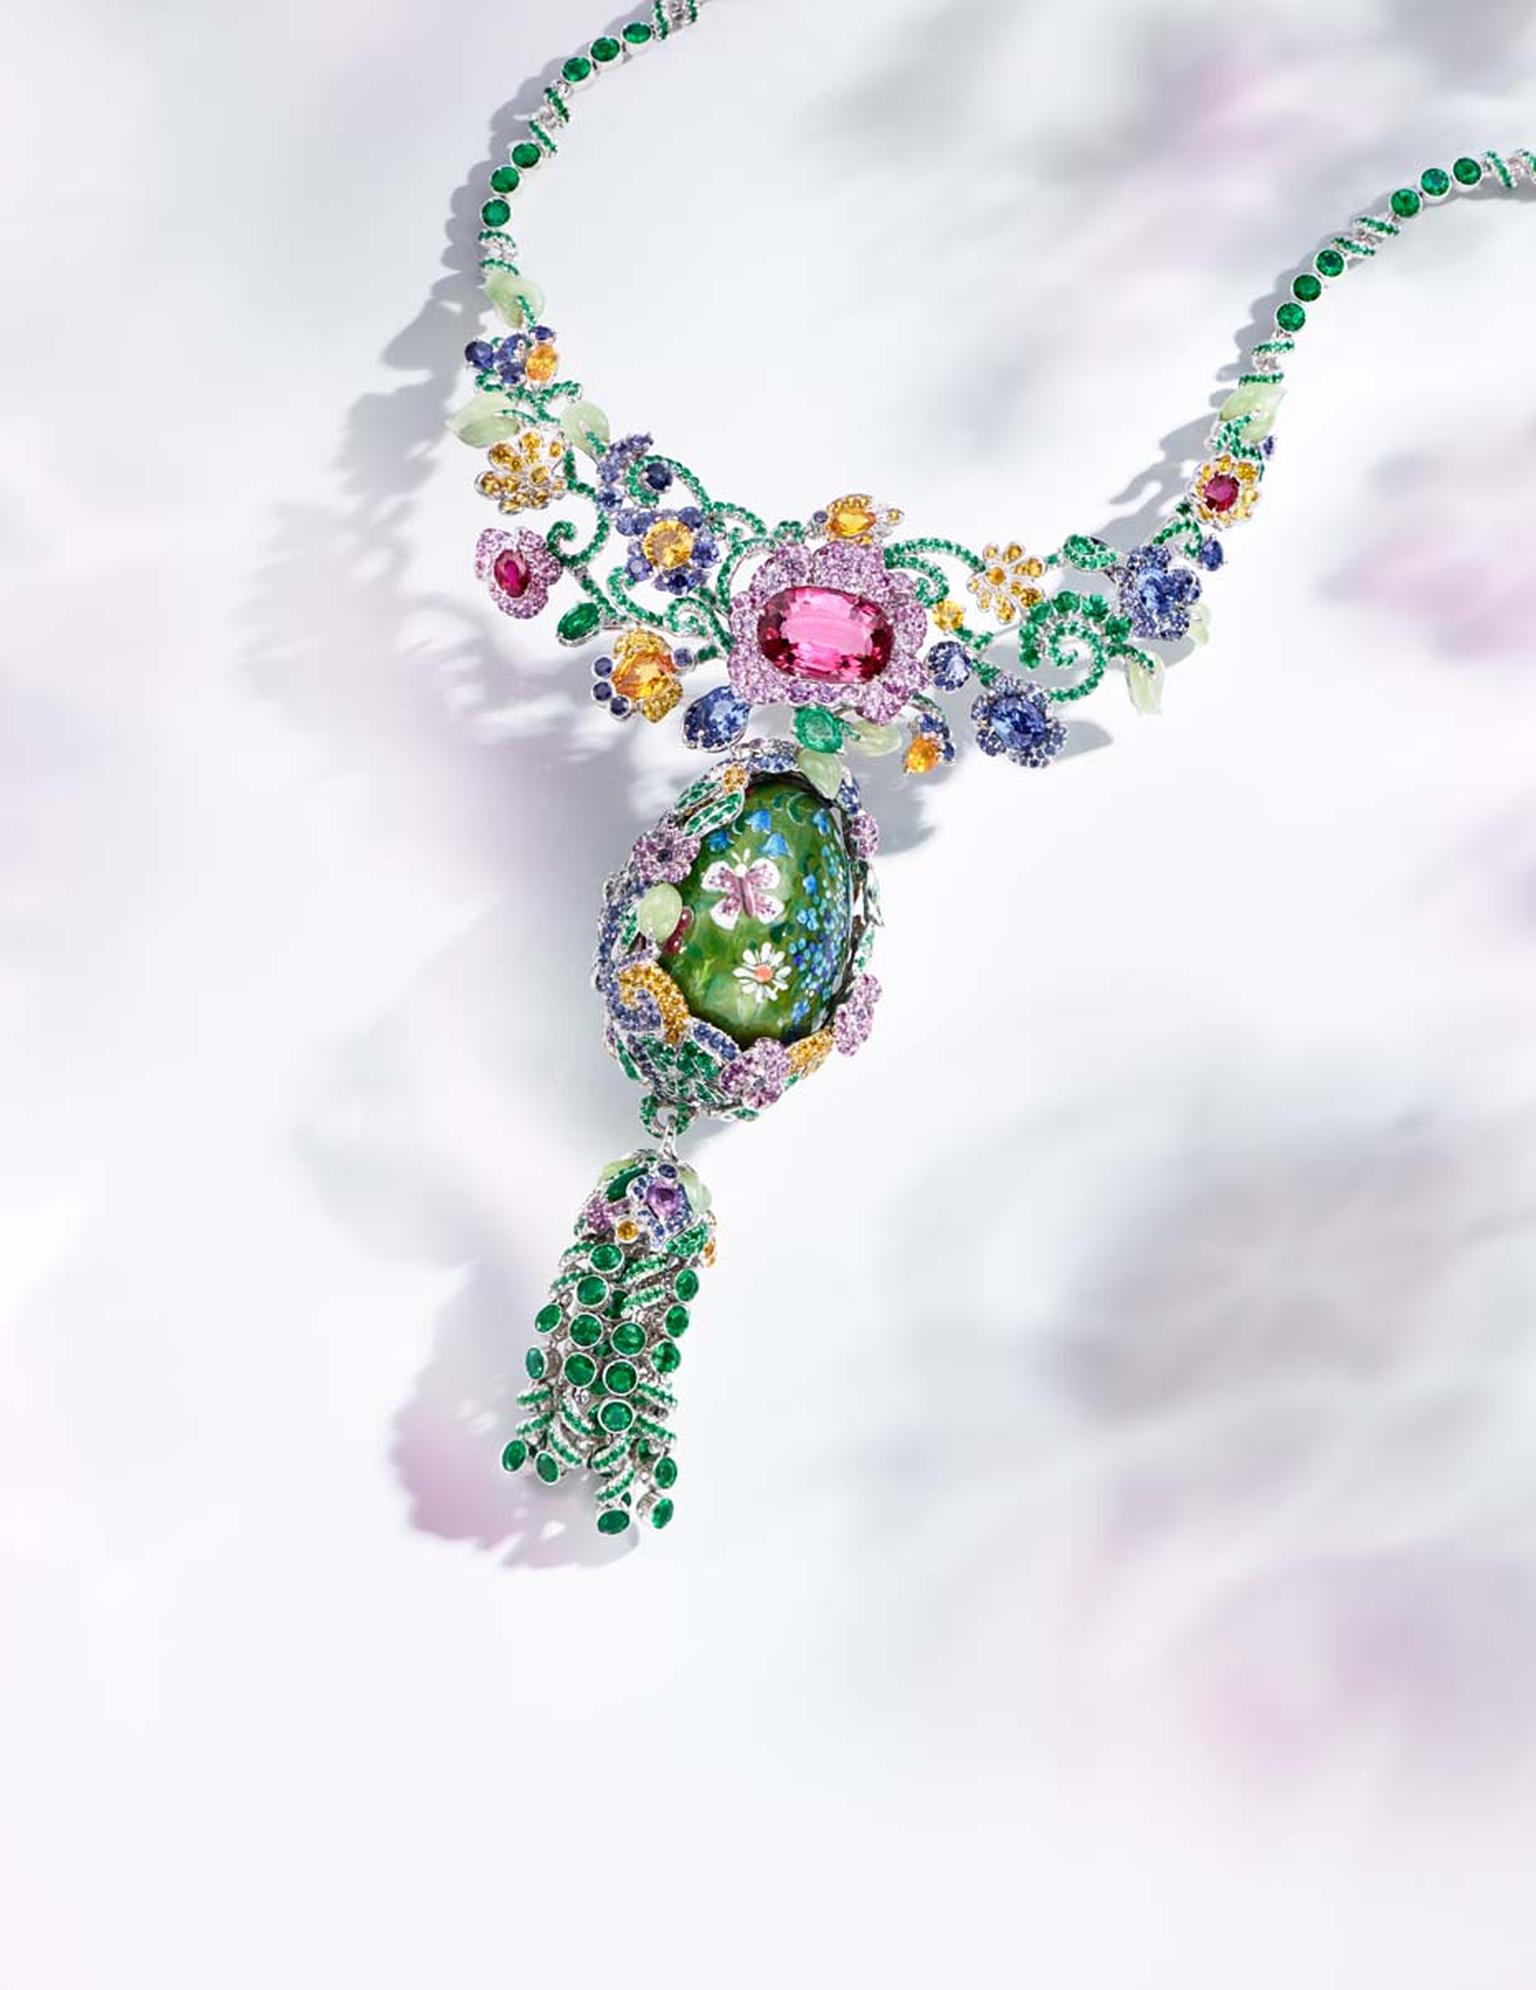 Fabergé will be showcasing both mid-range jewelry as well as a selection of awe-inspiring masterpieces at the Couture Show Las Vegas, including this one-of-a-kind Fabergé necklace, the centerpiece of the Secret Garden collection, with a detachable, rotati